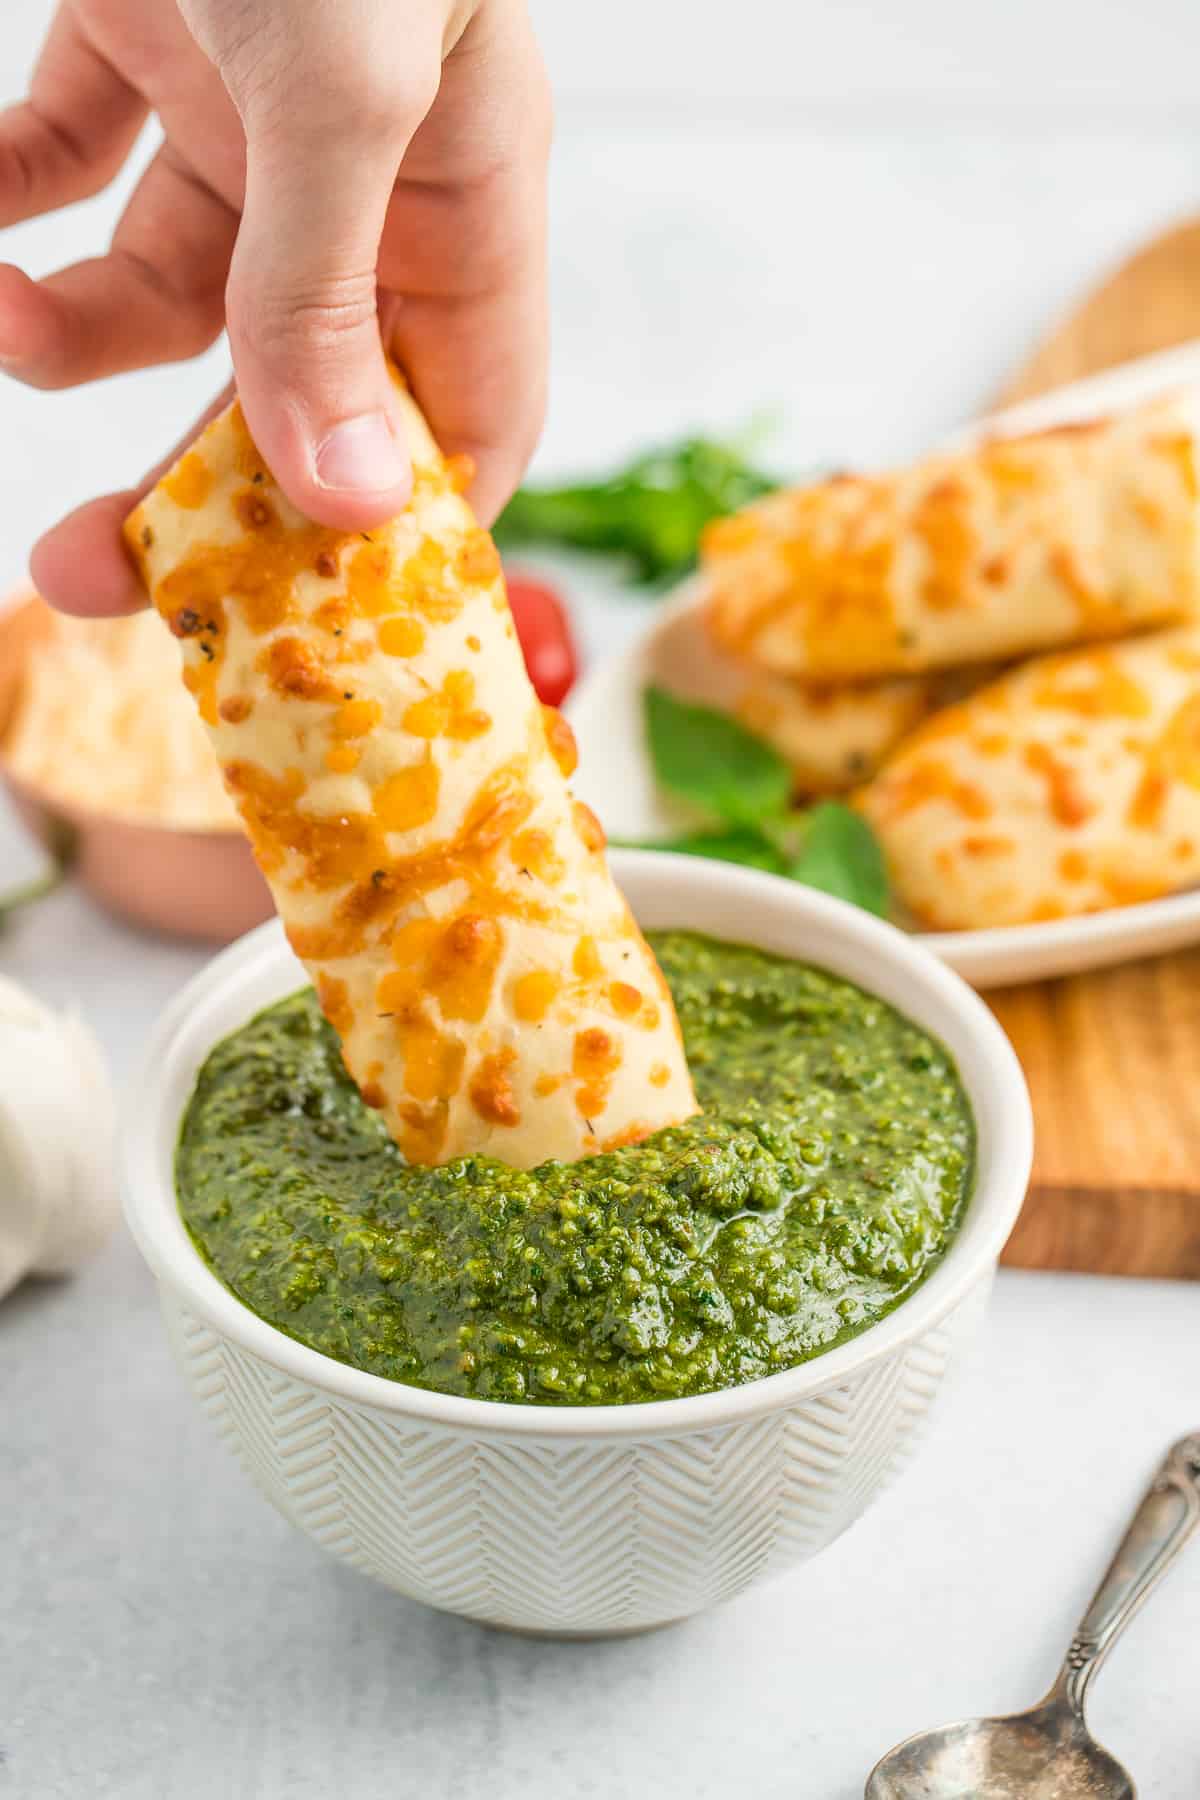 a hand dipping a cheesy breadstick into a white bowl of homemade pesto.